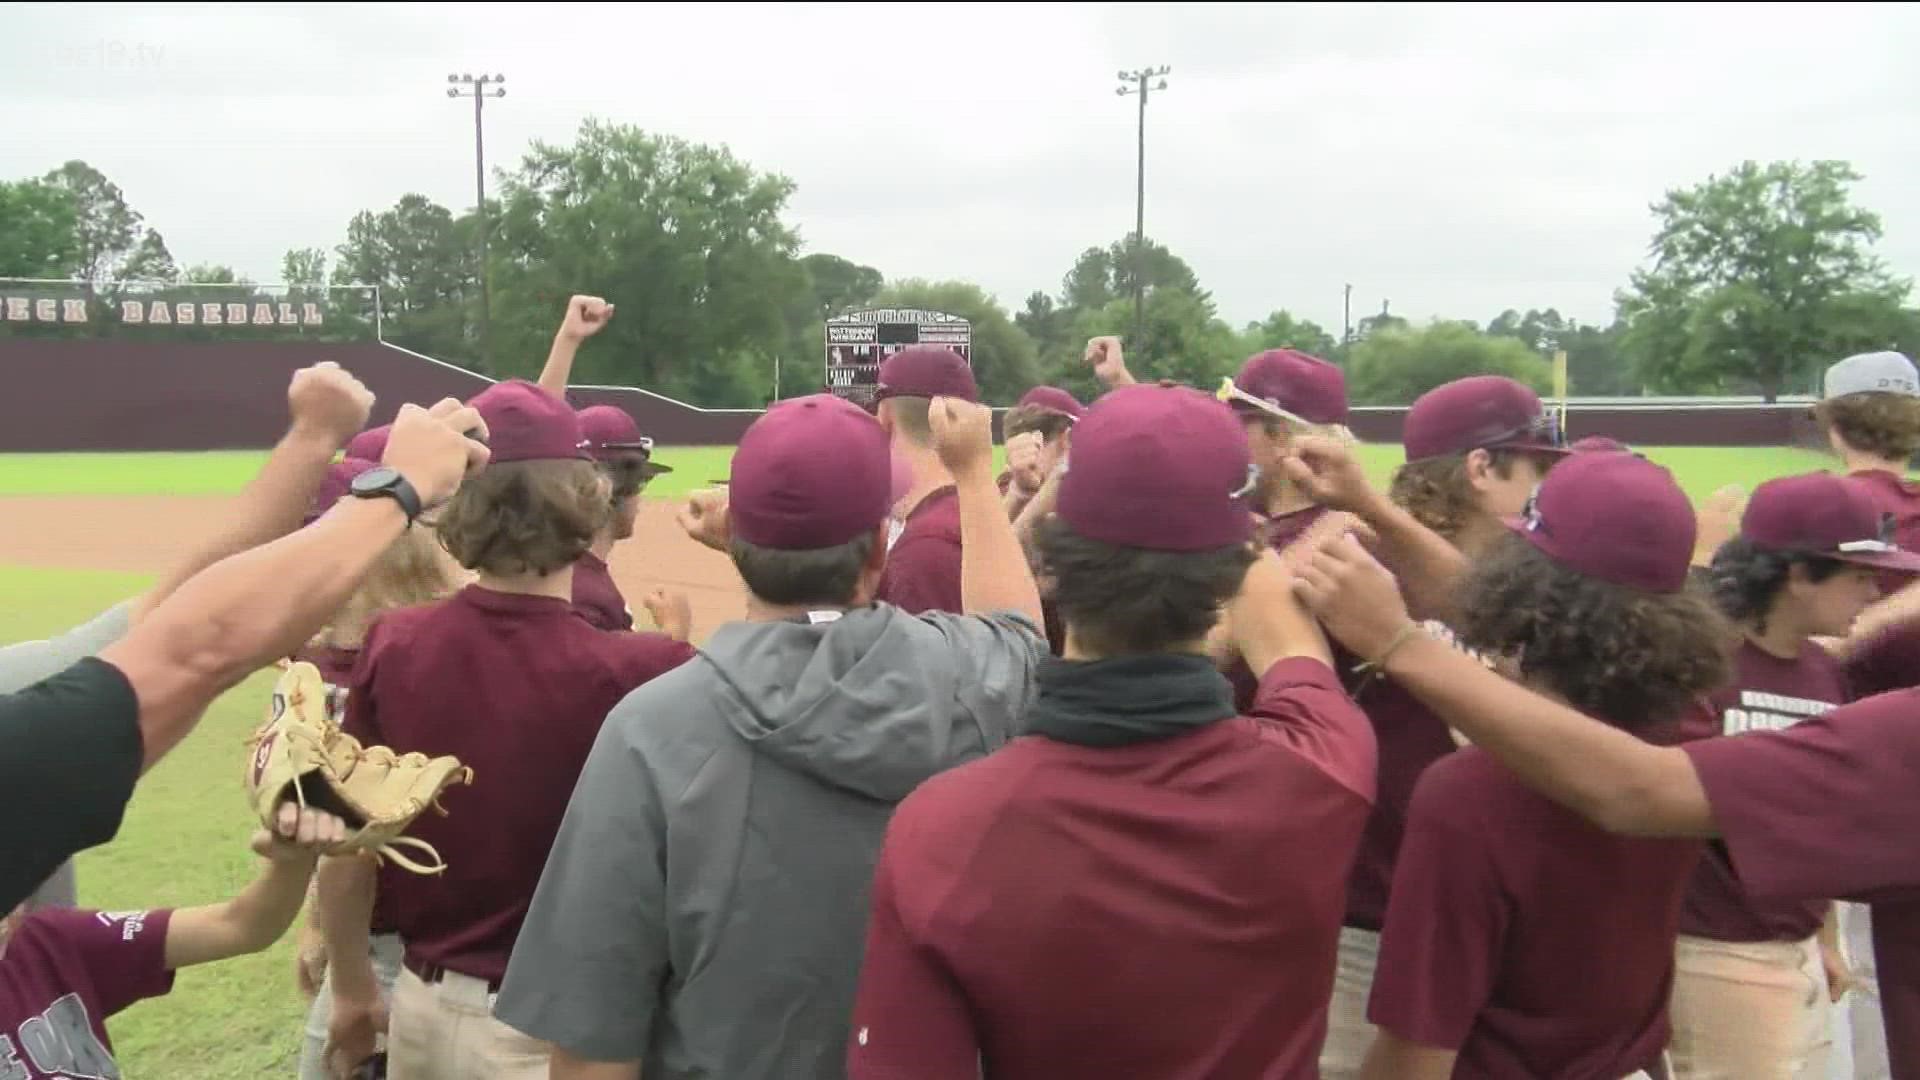 After blanking West Rusk in the quarterfinals, White oak baseball is headed back to the semifinals for the first time since 2018.